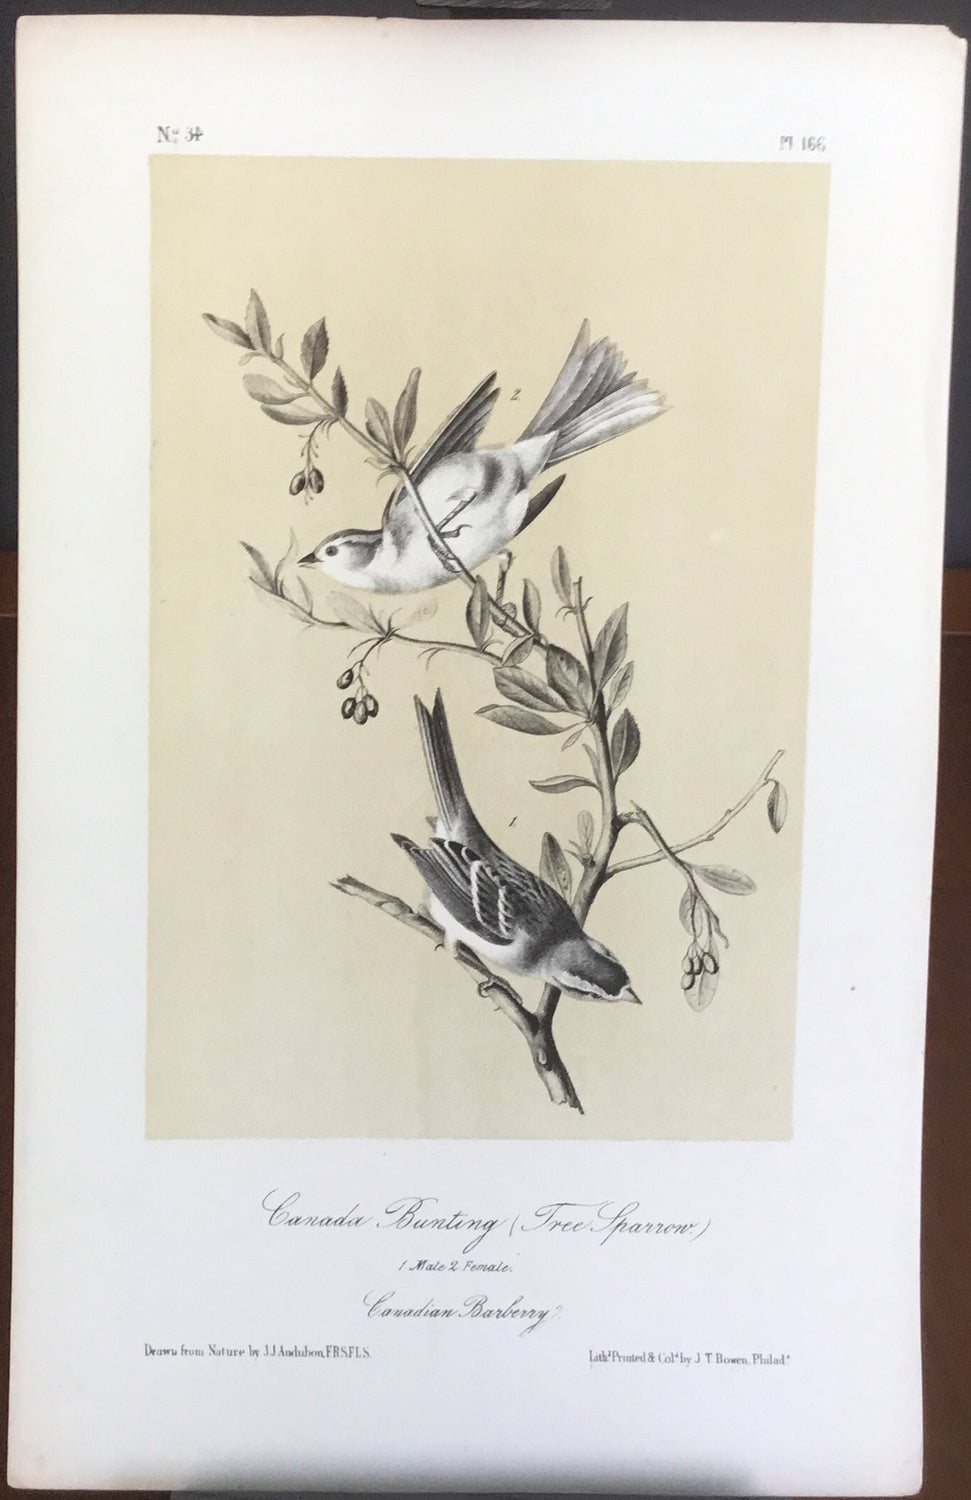 Audubon Canada Bunting and Tree Sparrow (2), plate 166, uncolored test sheet, 7 x 11